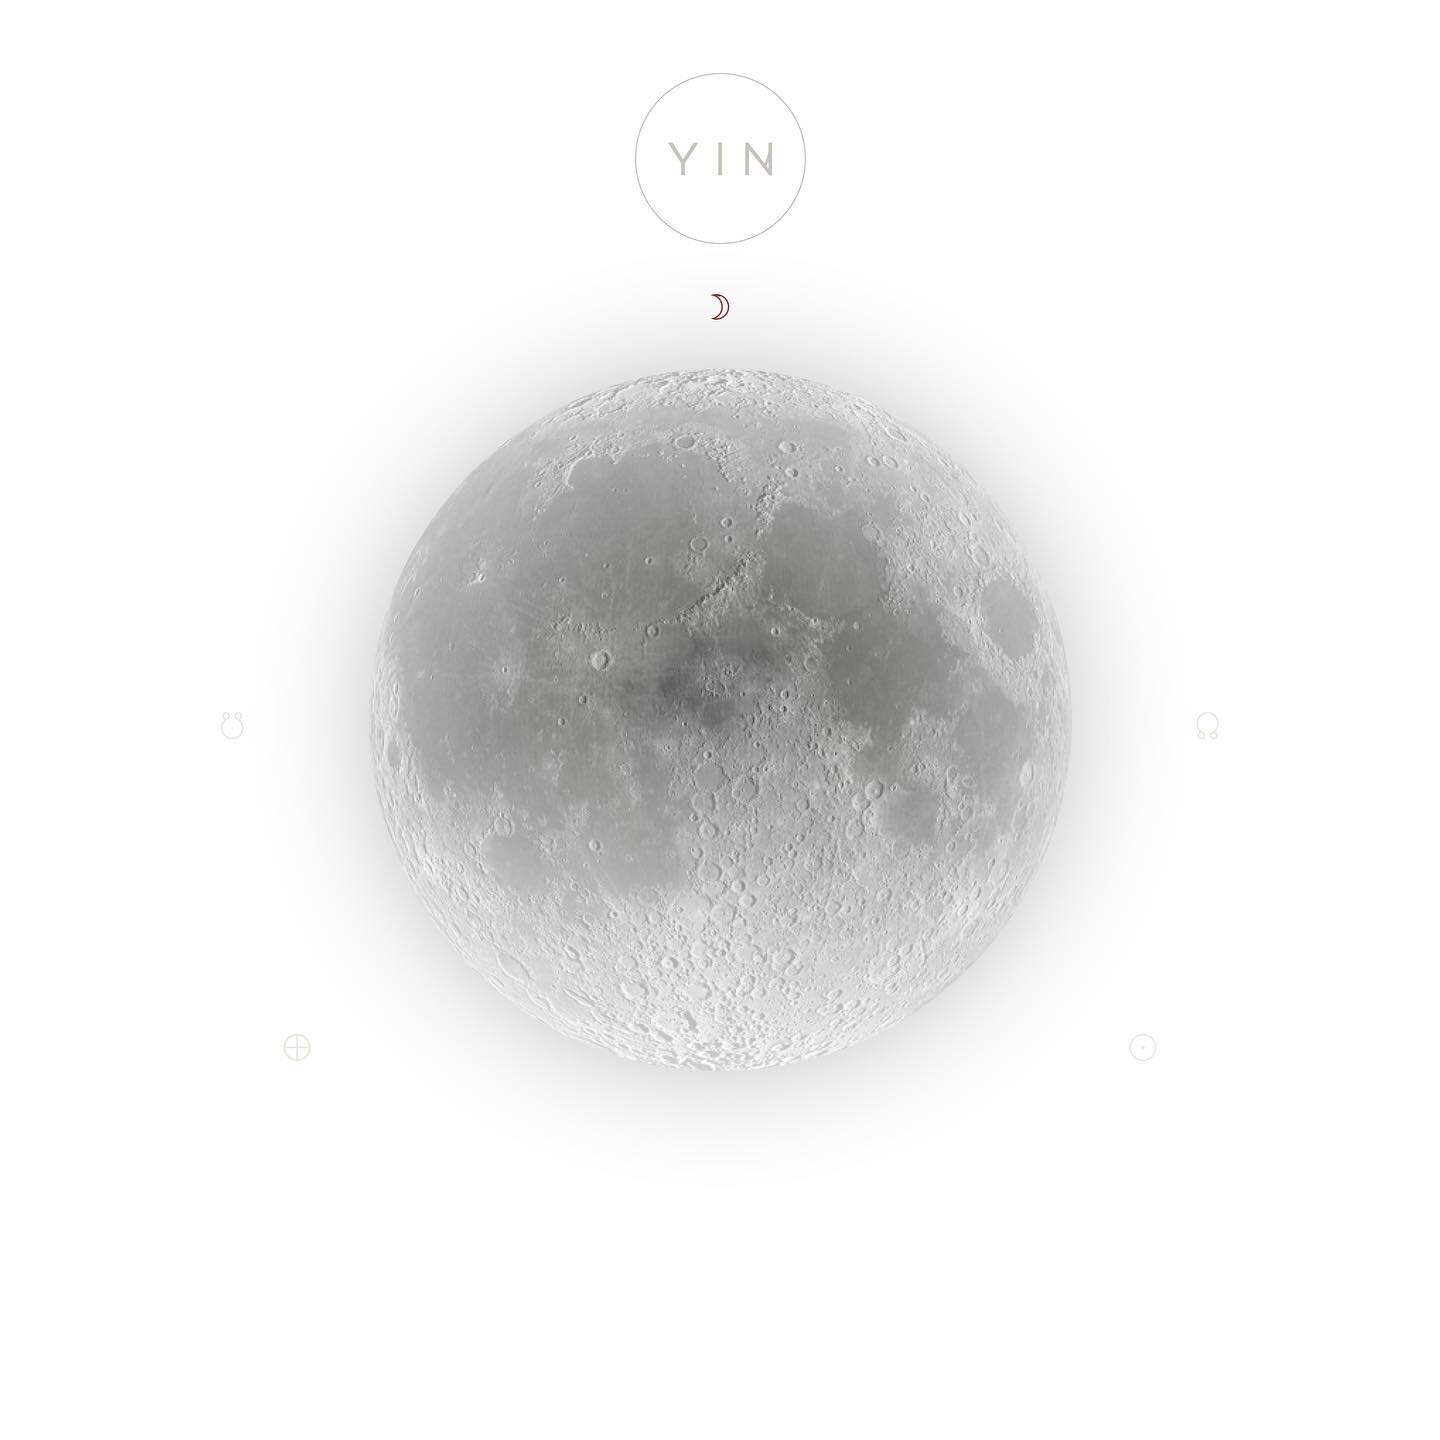 Full Moon of July &bull; Fruit Moon &bull; may we harvest the fruits planted in the early Spring. 

This Aquarian Moon is a Yang Moon of strong outwards energies. It is the culmination of a process started 6 months ago at the beginning of the year. T